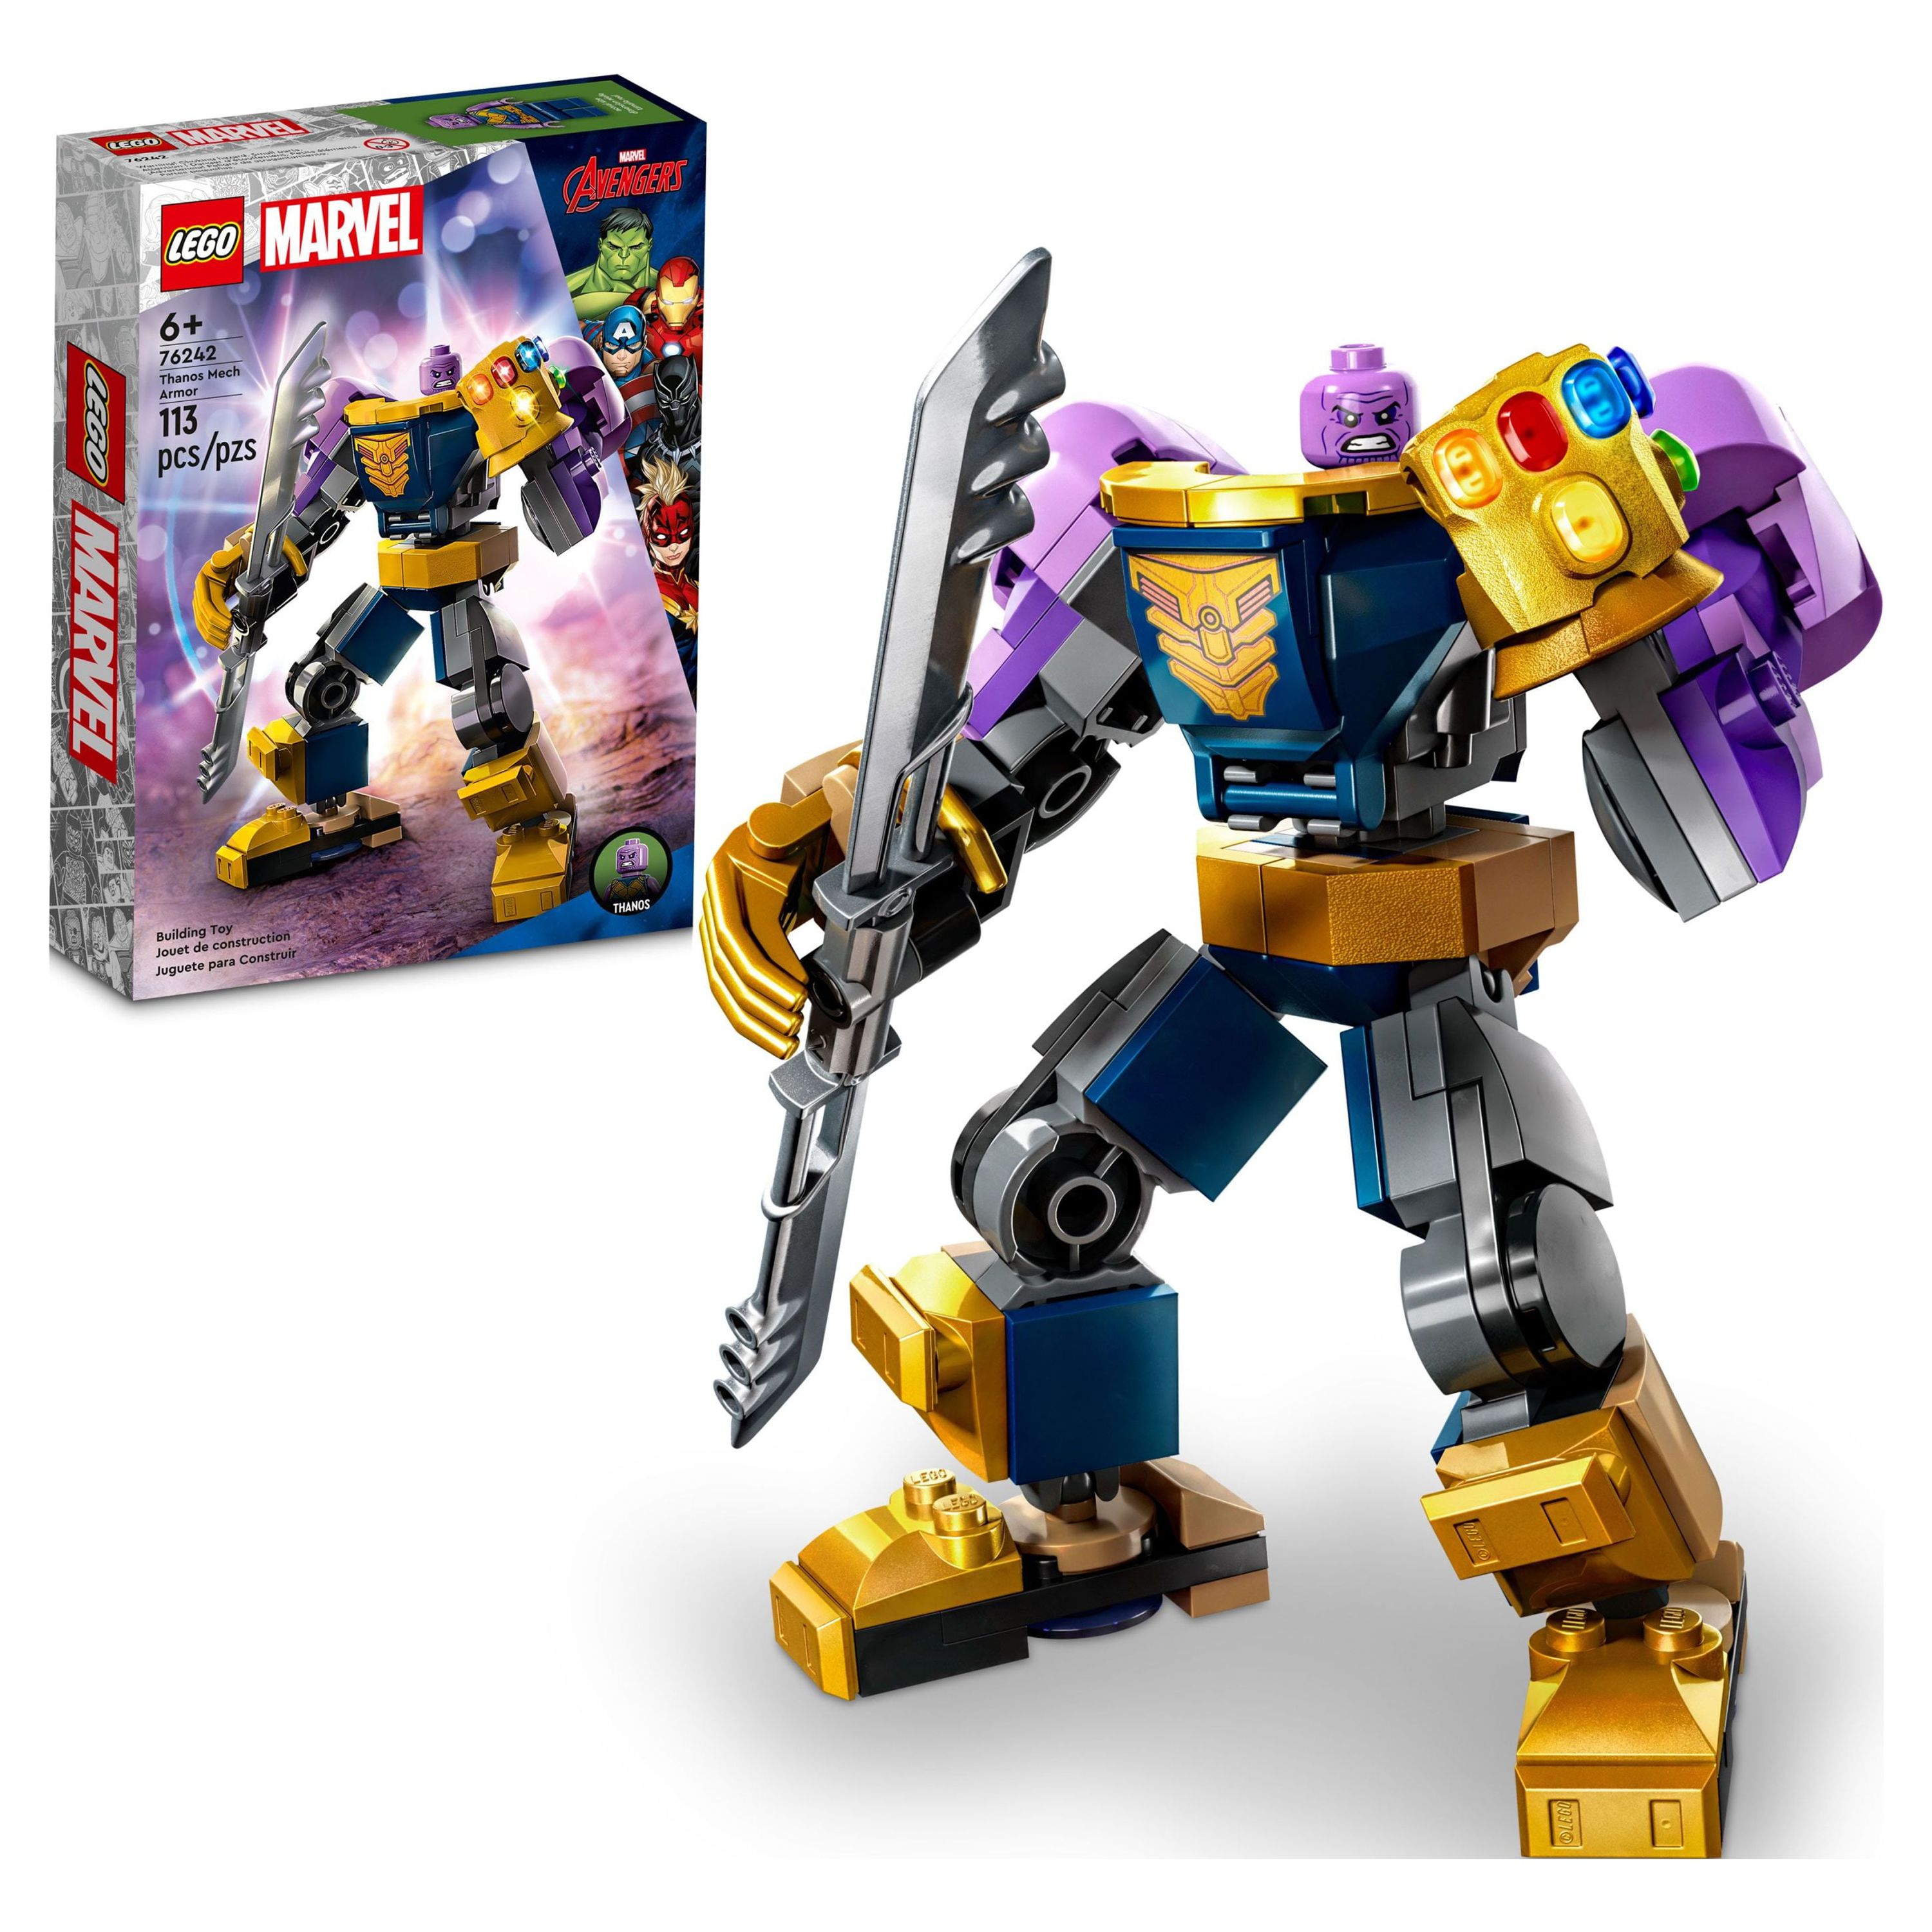 LEGO Marvel Thanos Mech Armor 76242, Avengers Action Figure Set, Building Toy with Infinity Gauntlet & Stones, Collectible Super Heroes Gift for Boys and Girls Ages 6+ - image 1 of 8